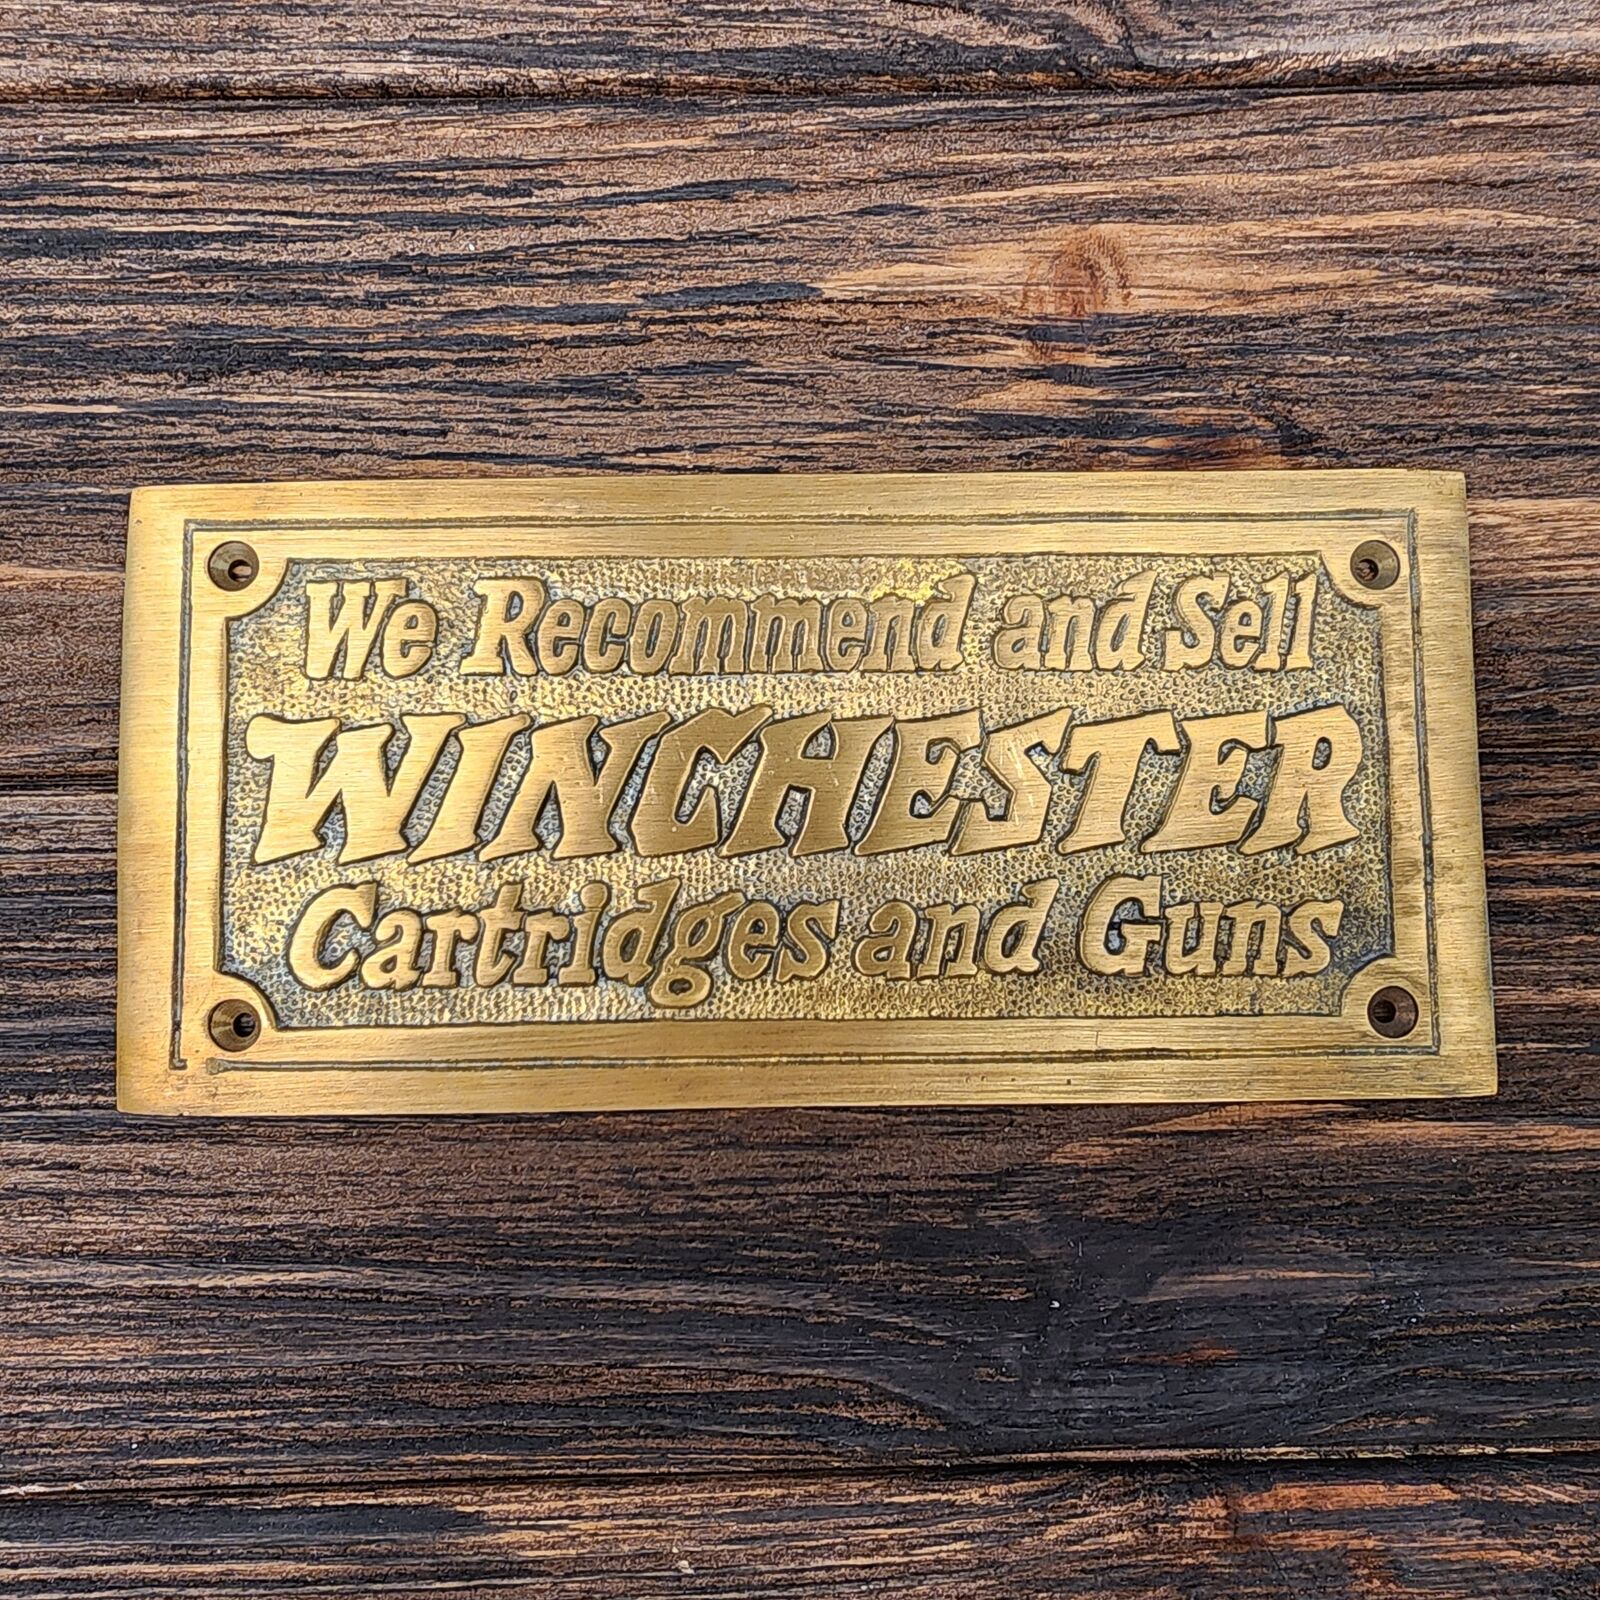 Winchester Cartridges And Guns Solid Brass Plaque With Antique Finish (5